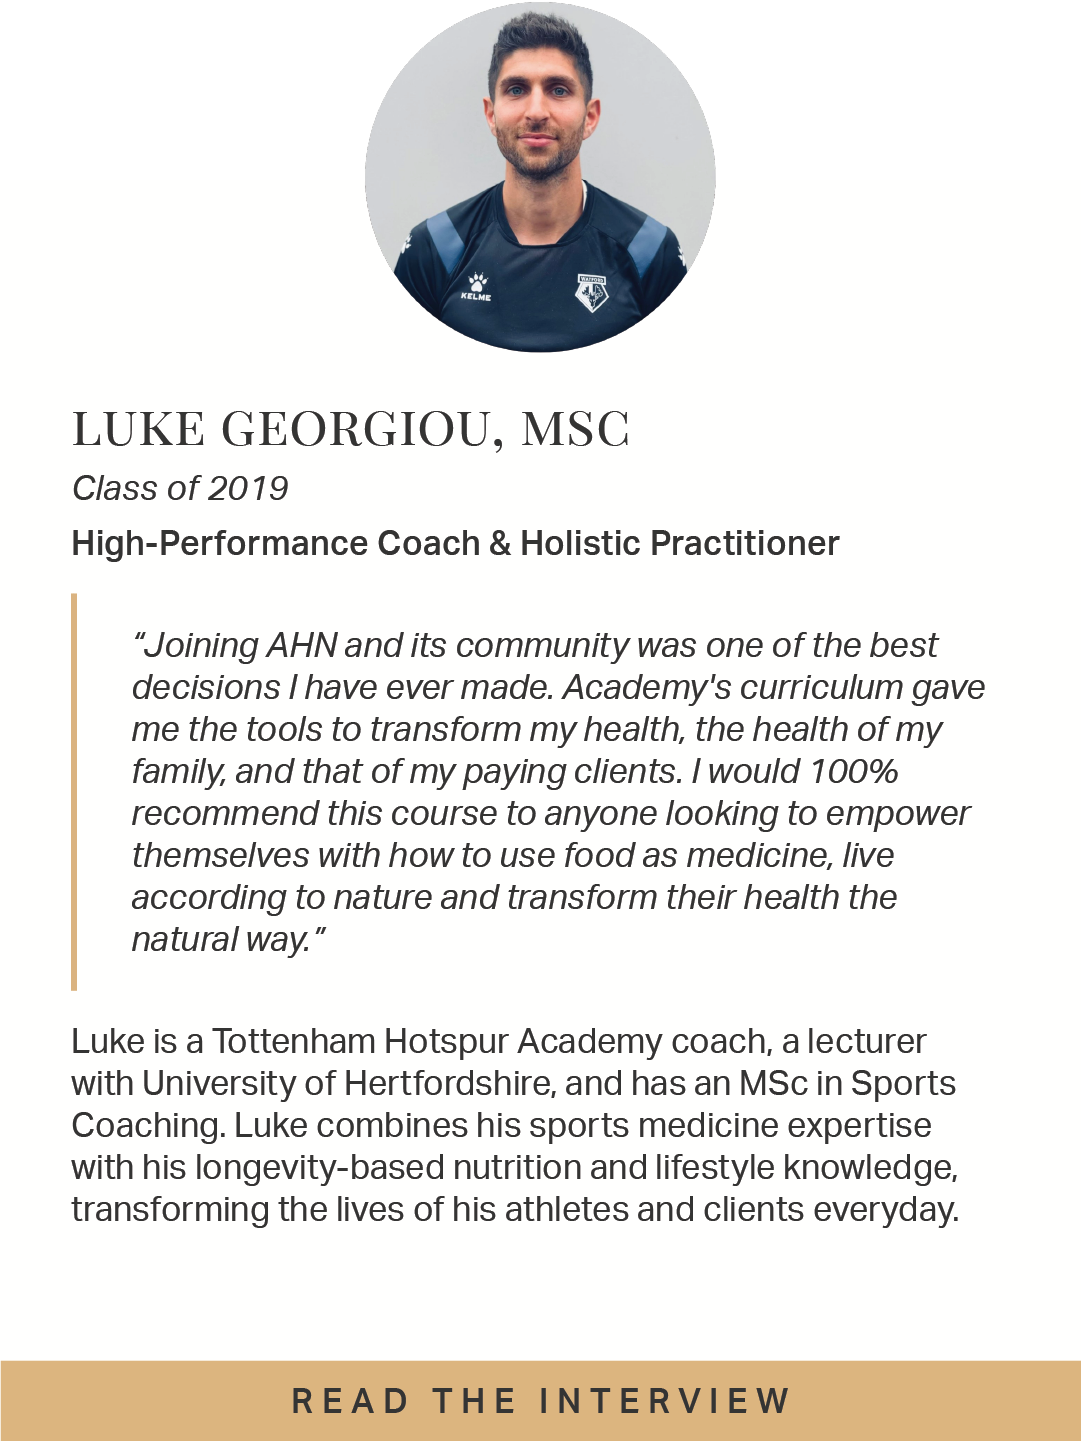  Tottenham Hotspur Academy coach, lecturer with University of Hertfordshire, and MSc in Sports Coaching. Luke combines his sports medicine expertise with his longevity-based nutrition and lifestyle knowledge, transforming the lives of his clients. 